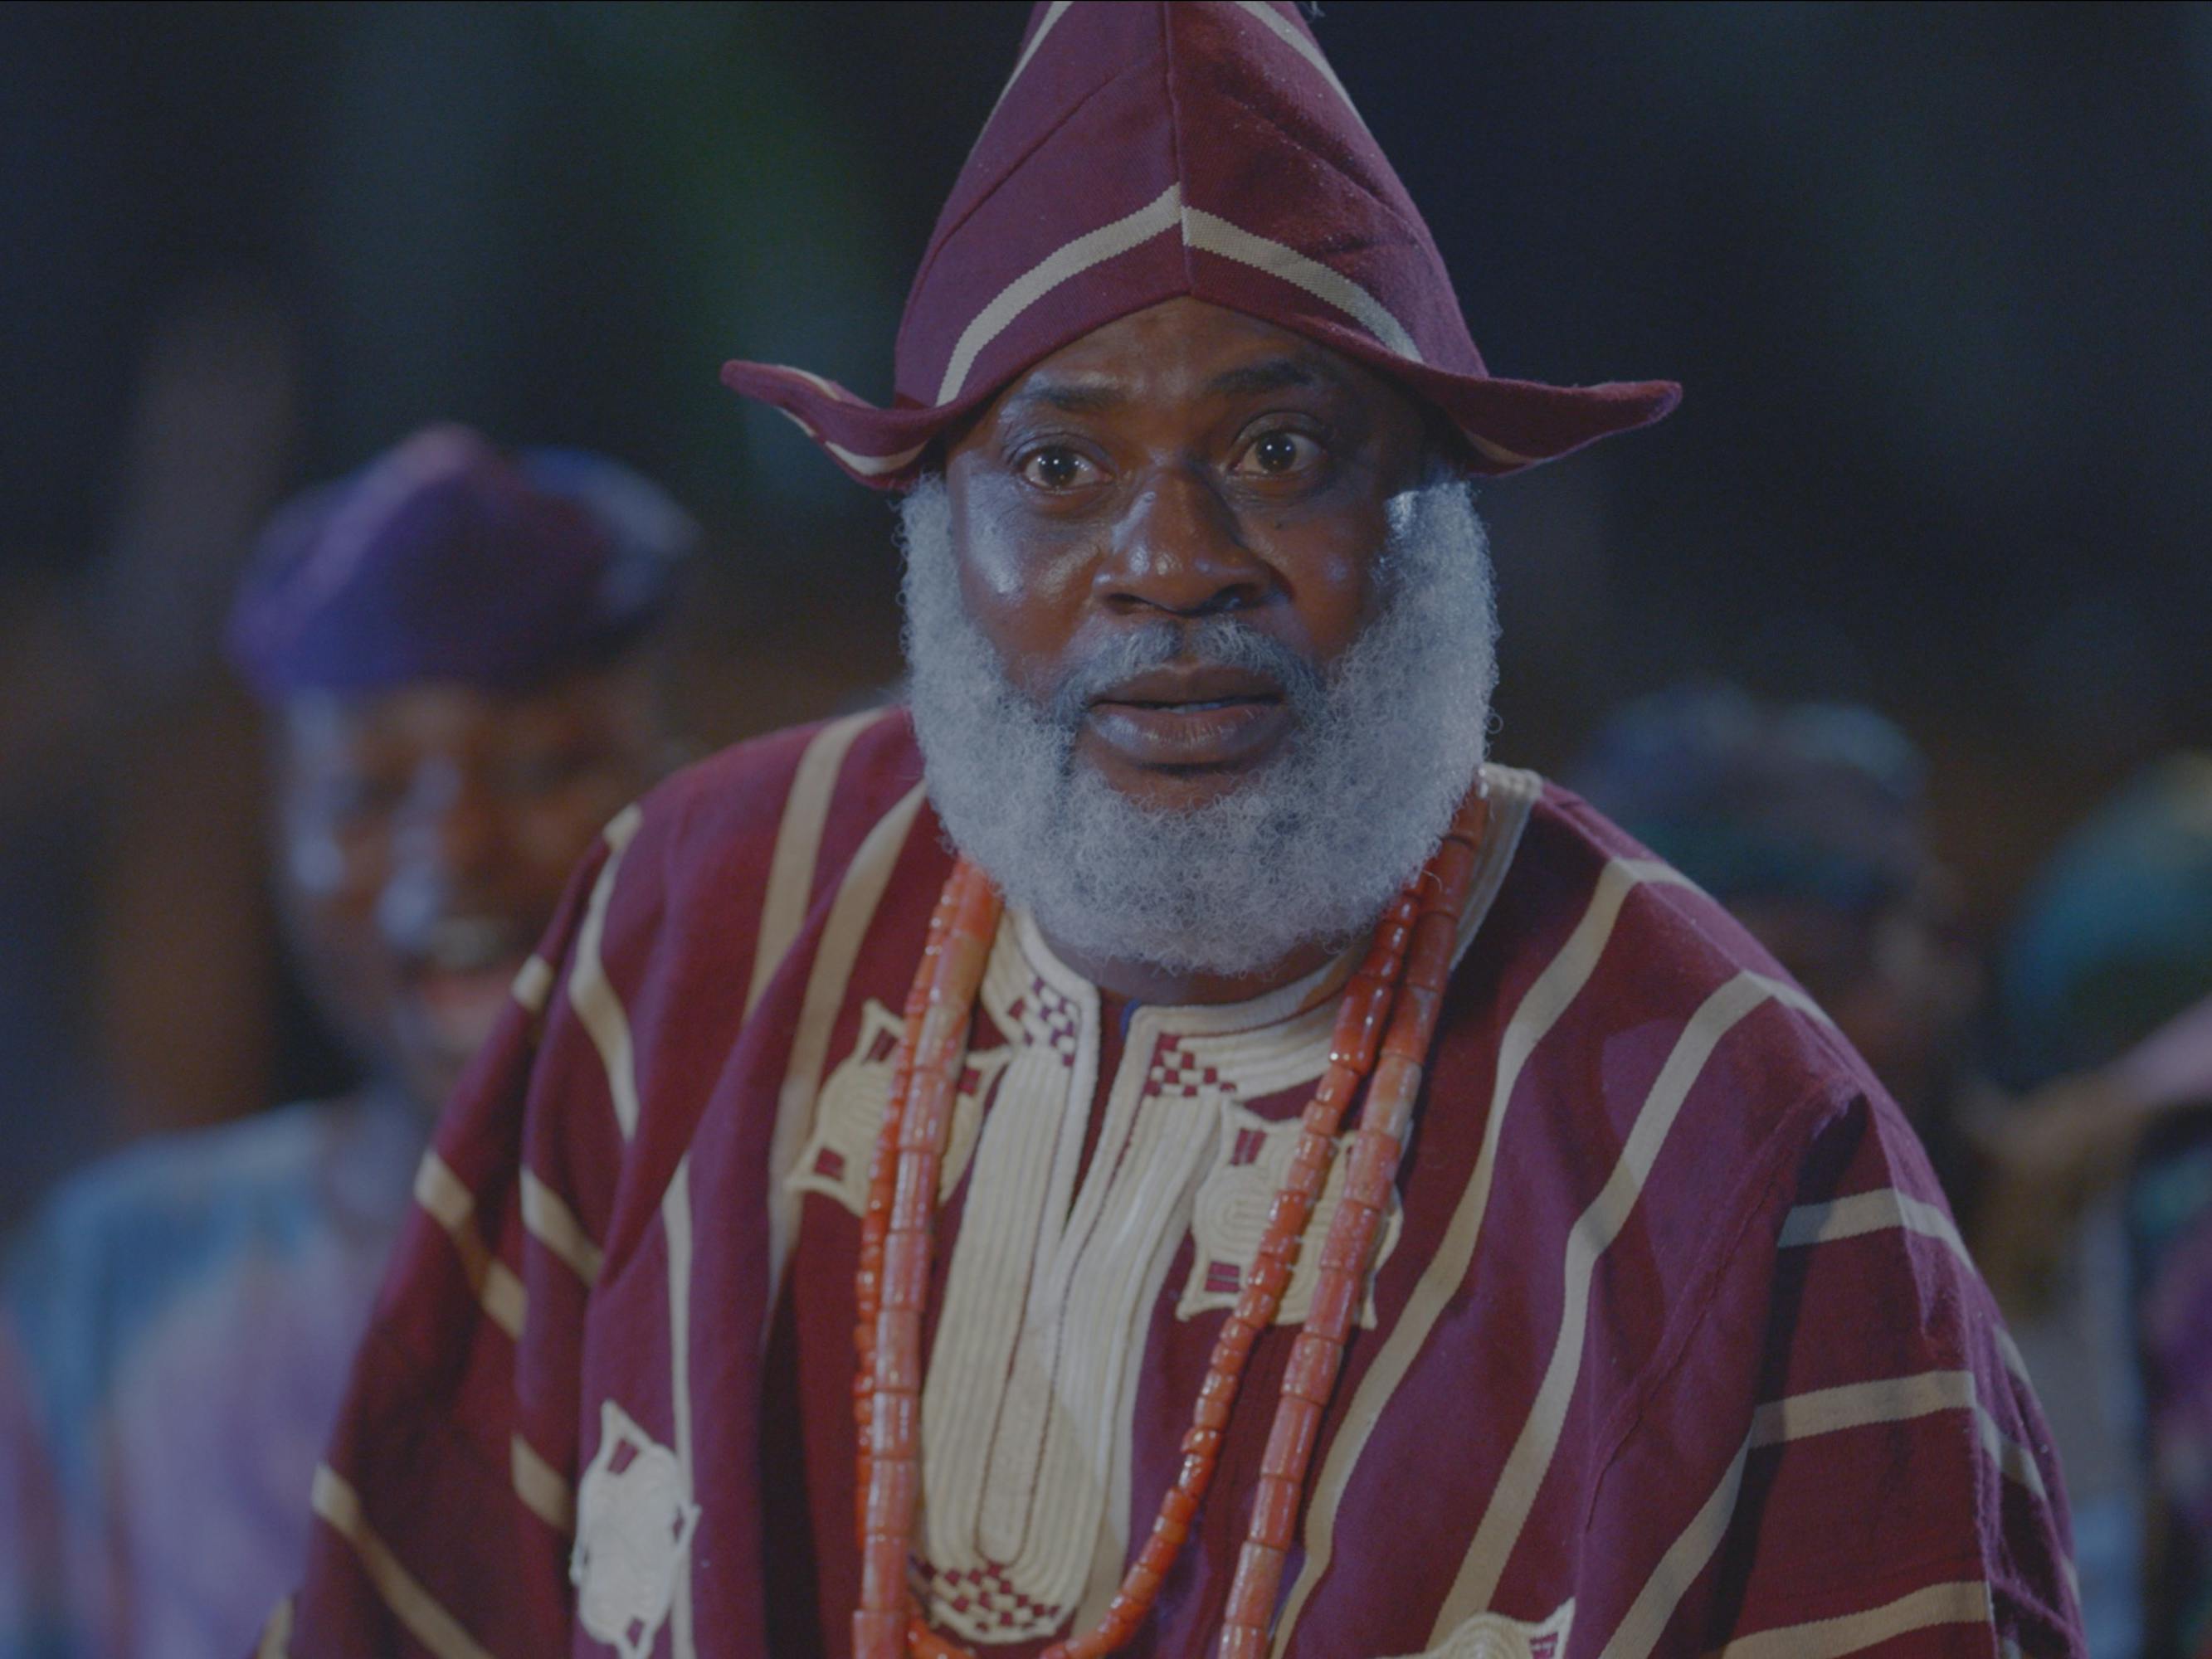 Elesin Oba (Odunlade Adekola) wears a red robe and hat and stands in dusky light.